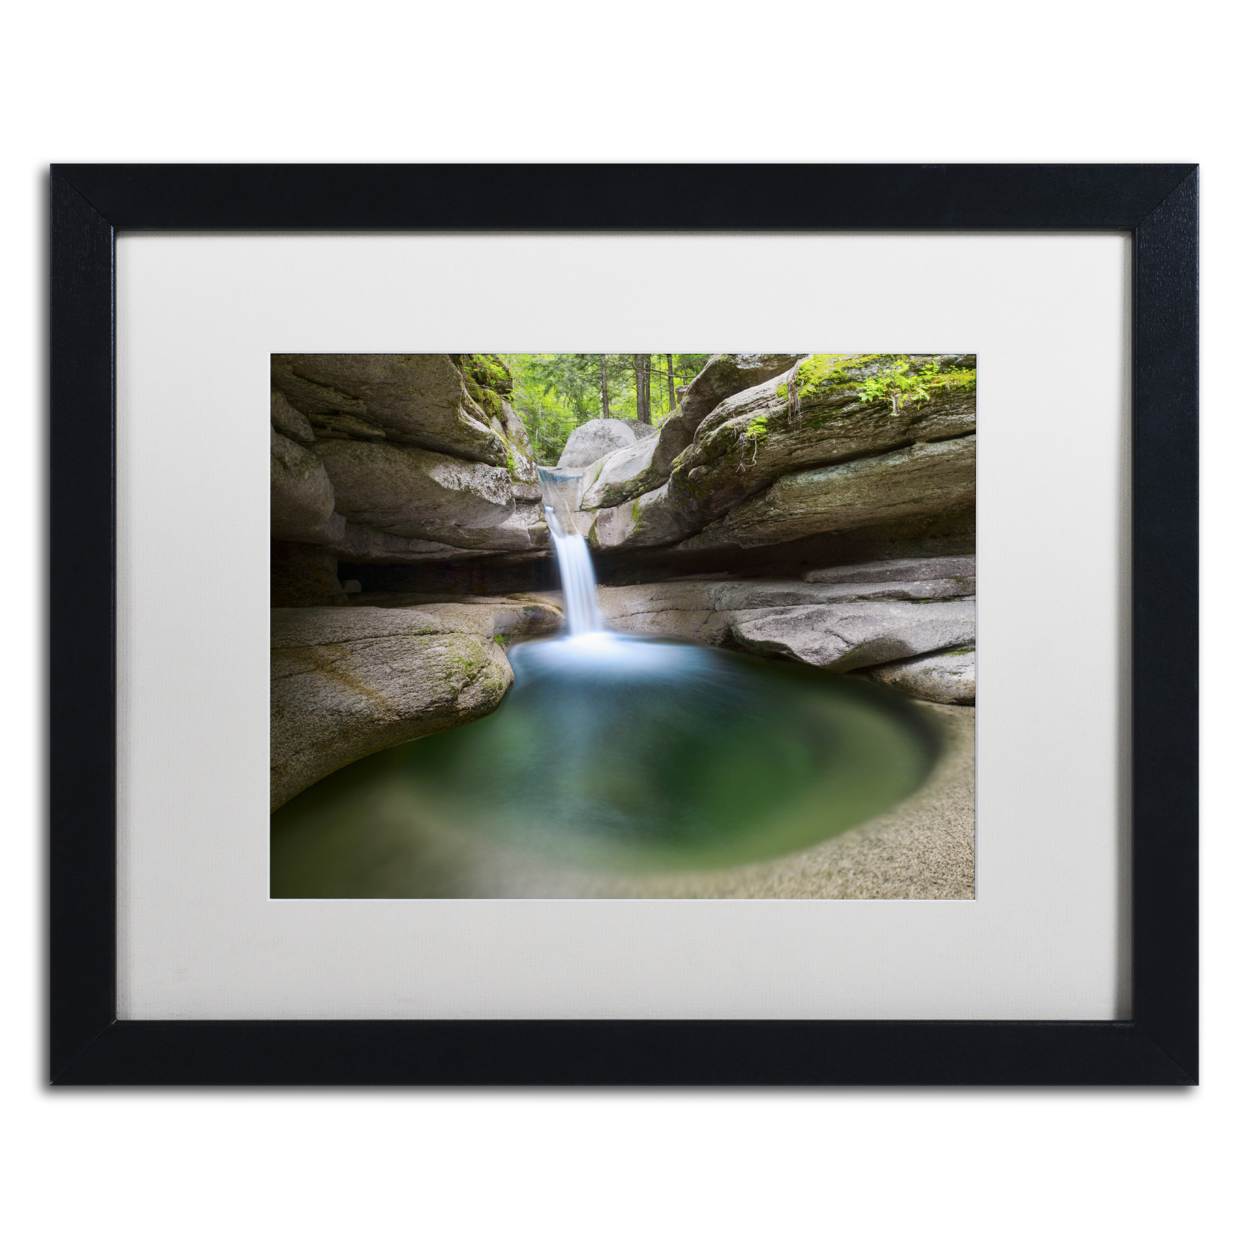 Michael Blanchette Photography 'Sabbaday Green Pool' Black Wooden Framed Art 18 X 22 Inches